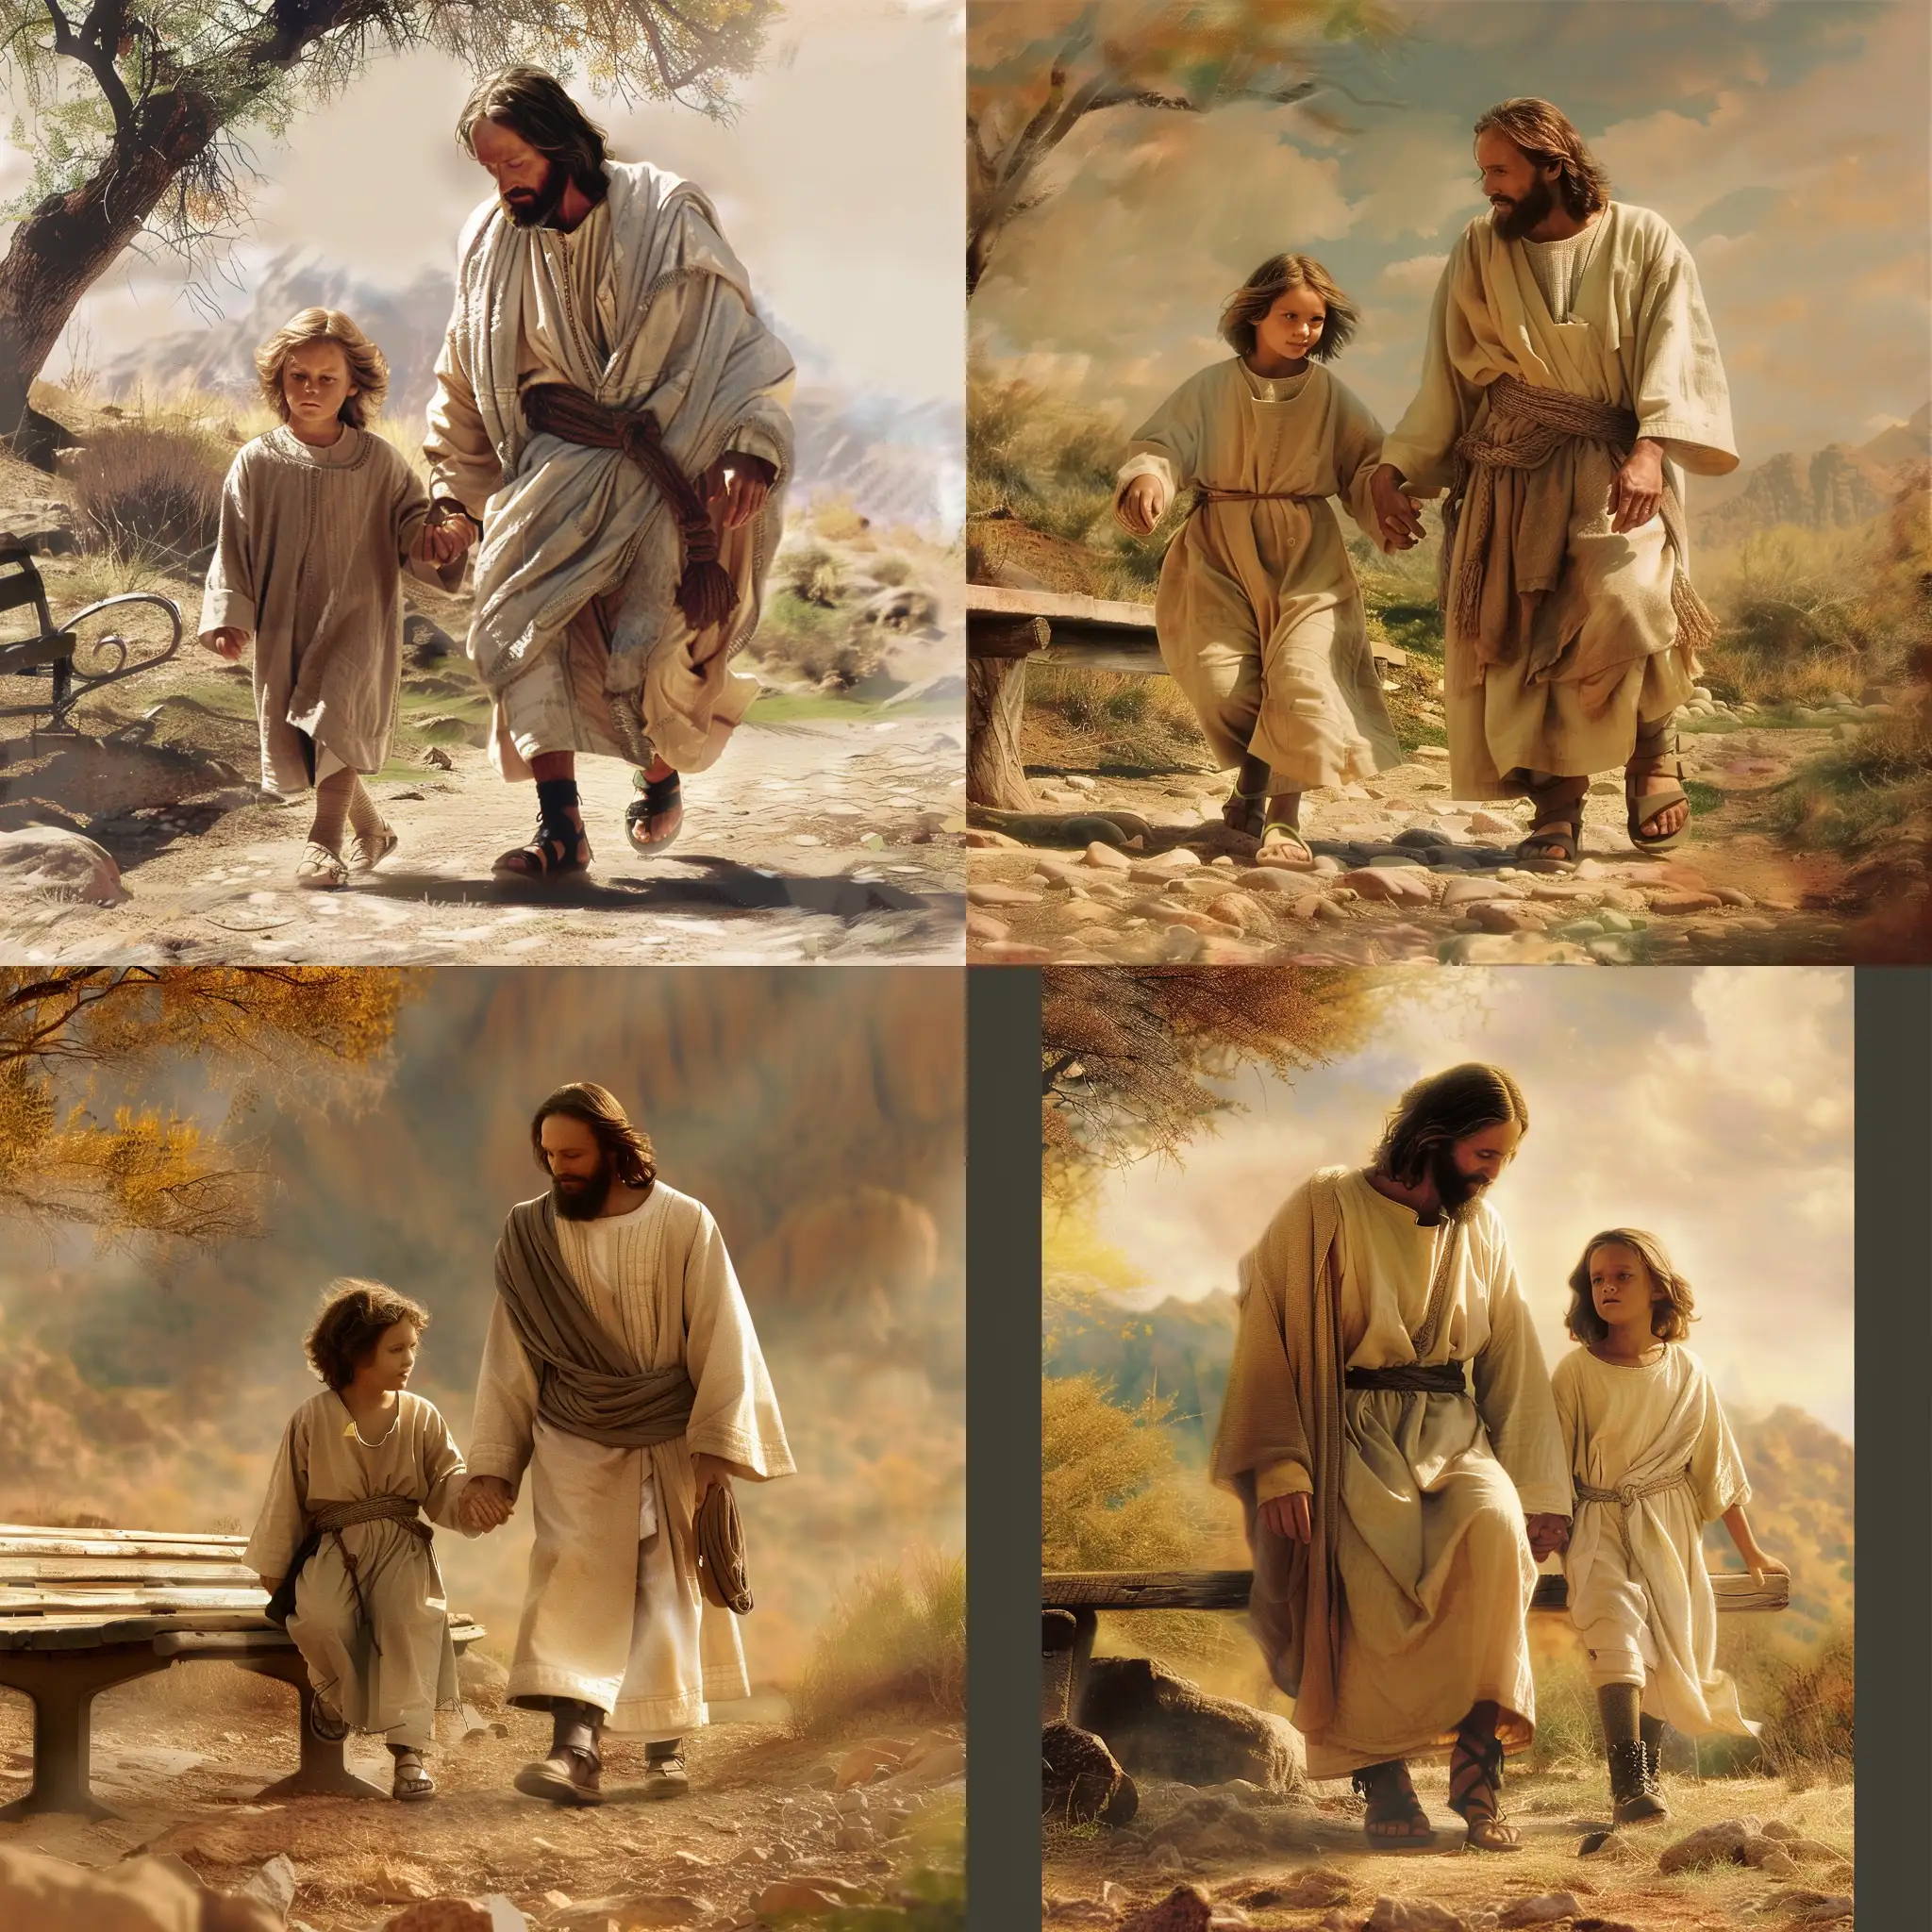 as a child, walks with Jesus  hand in hand as they sit on a park bench talking and learning have the picture in today's time frame

